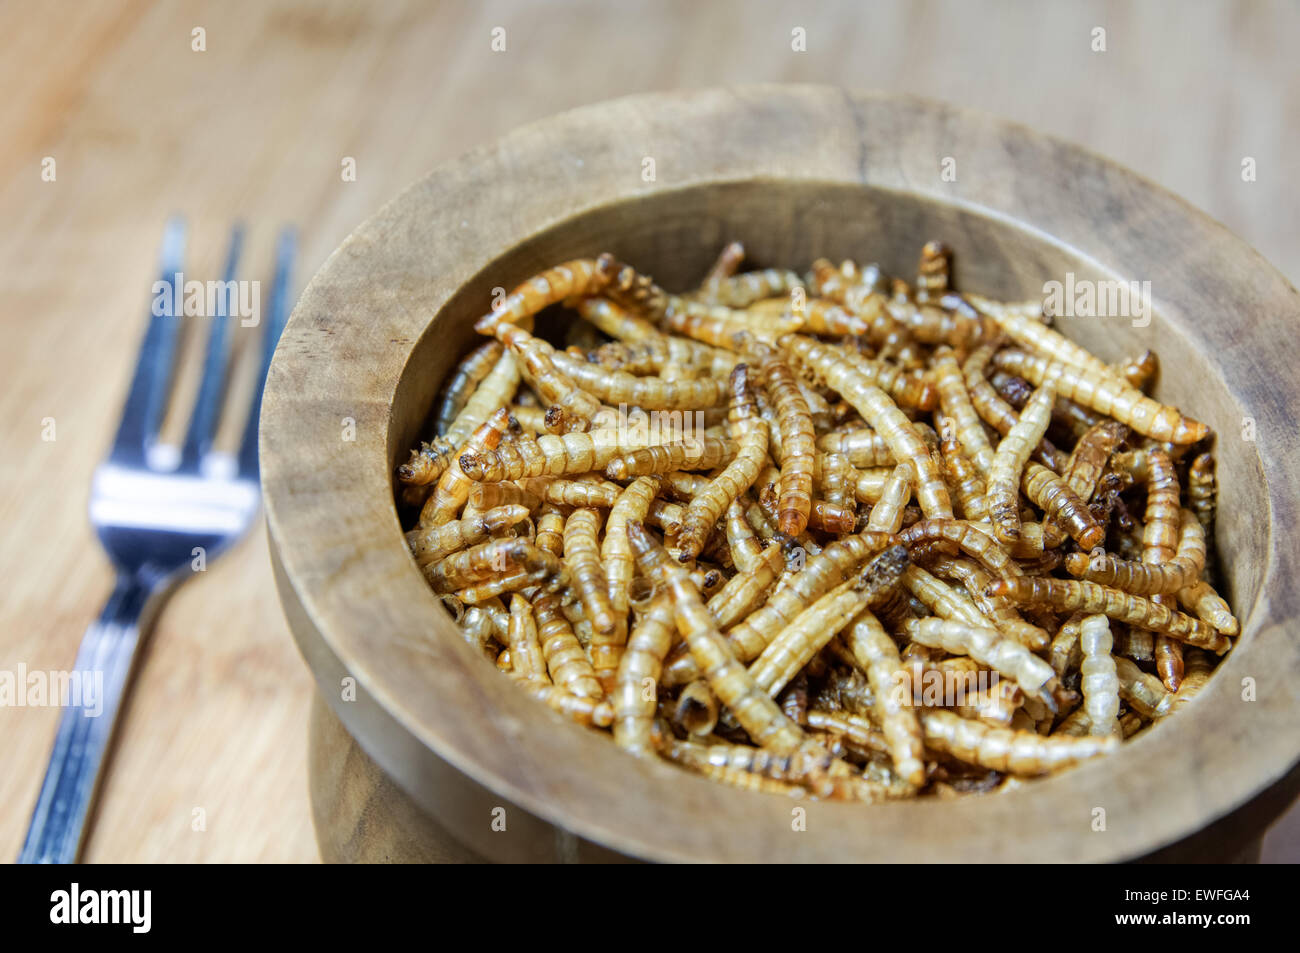 Edible mealworms in a bowl Stock Photo